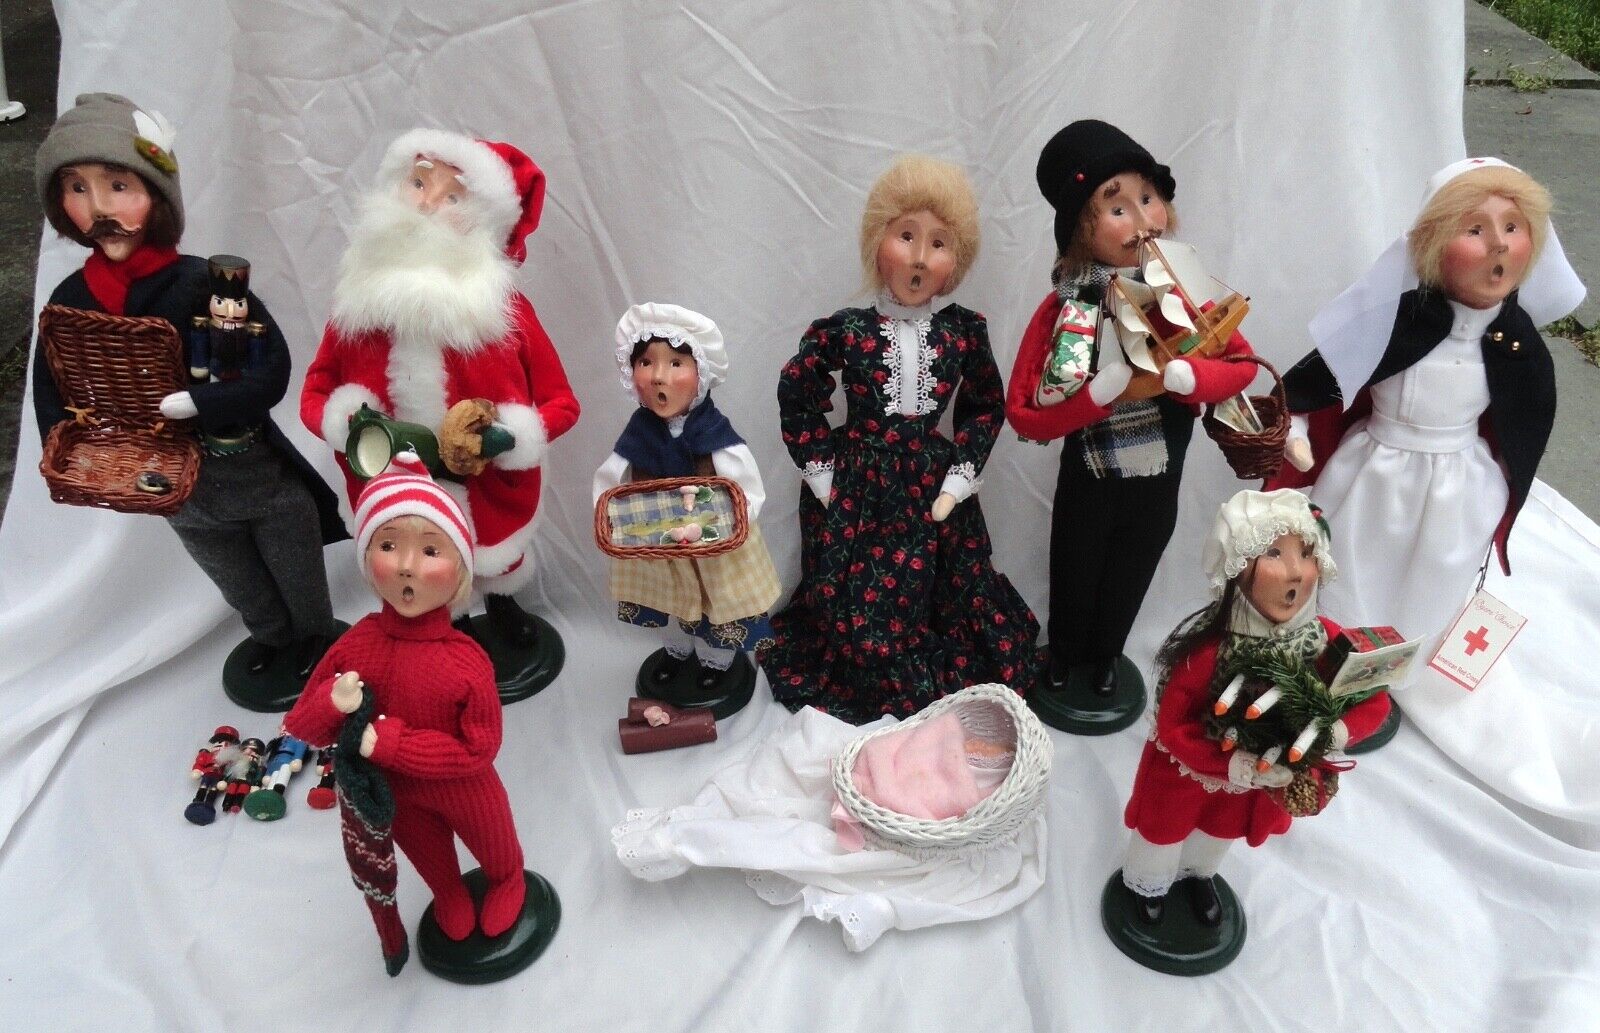 Lot of 9 Byers Choice Figurines, 2003, USED